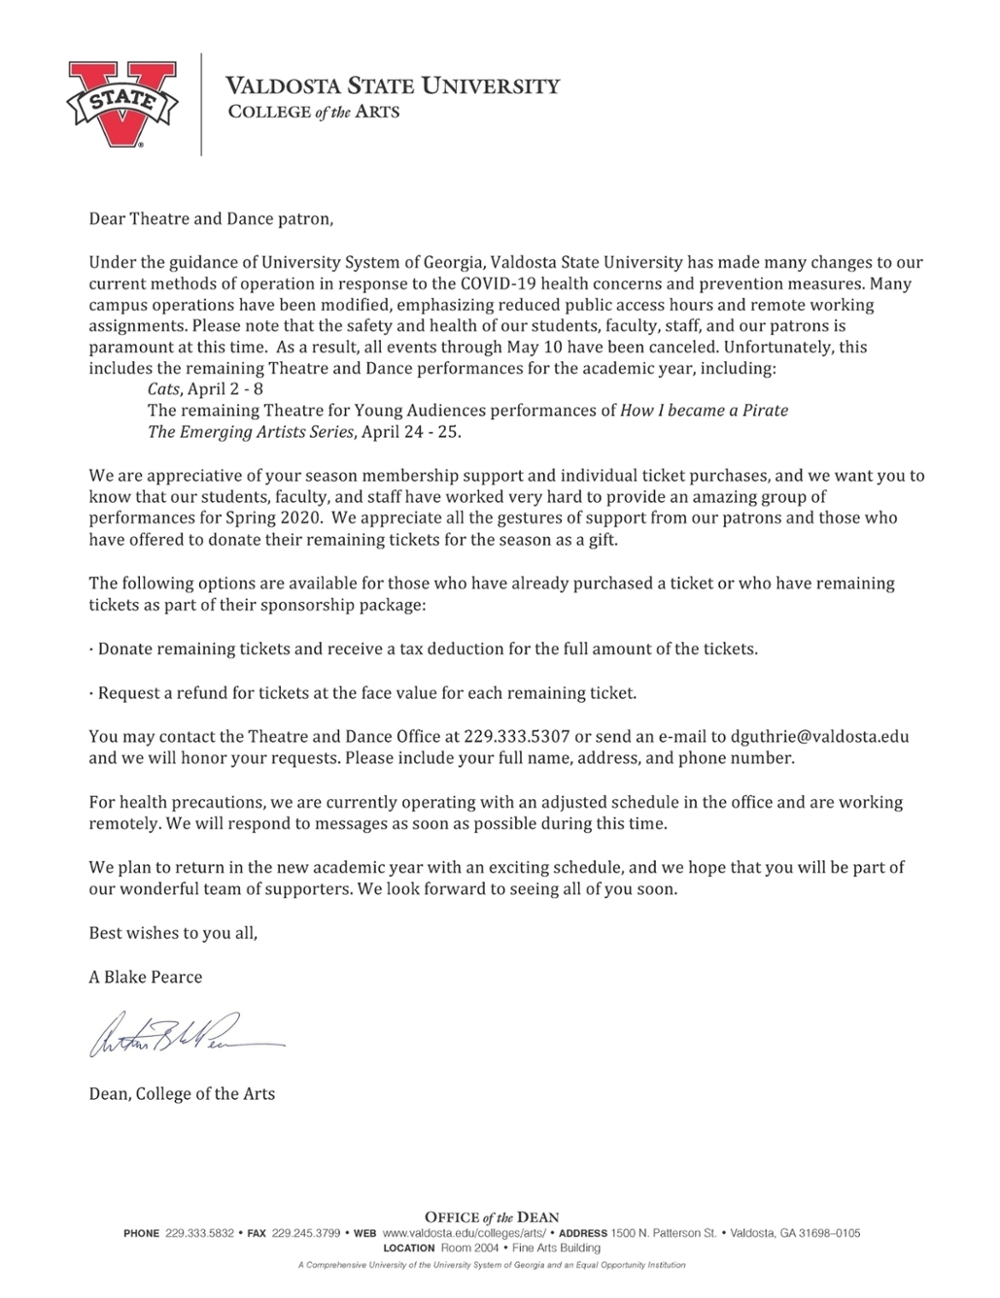 Letter from the Dean of the College of the Arts